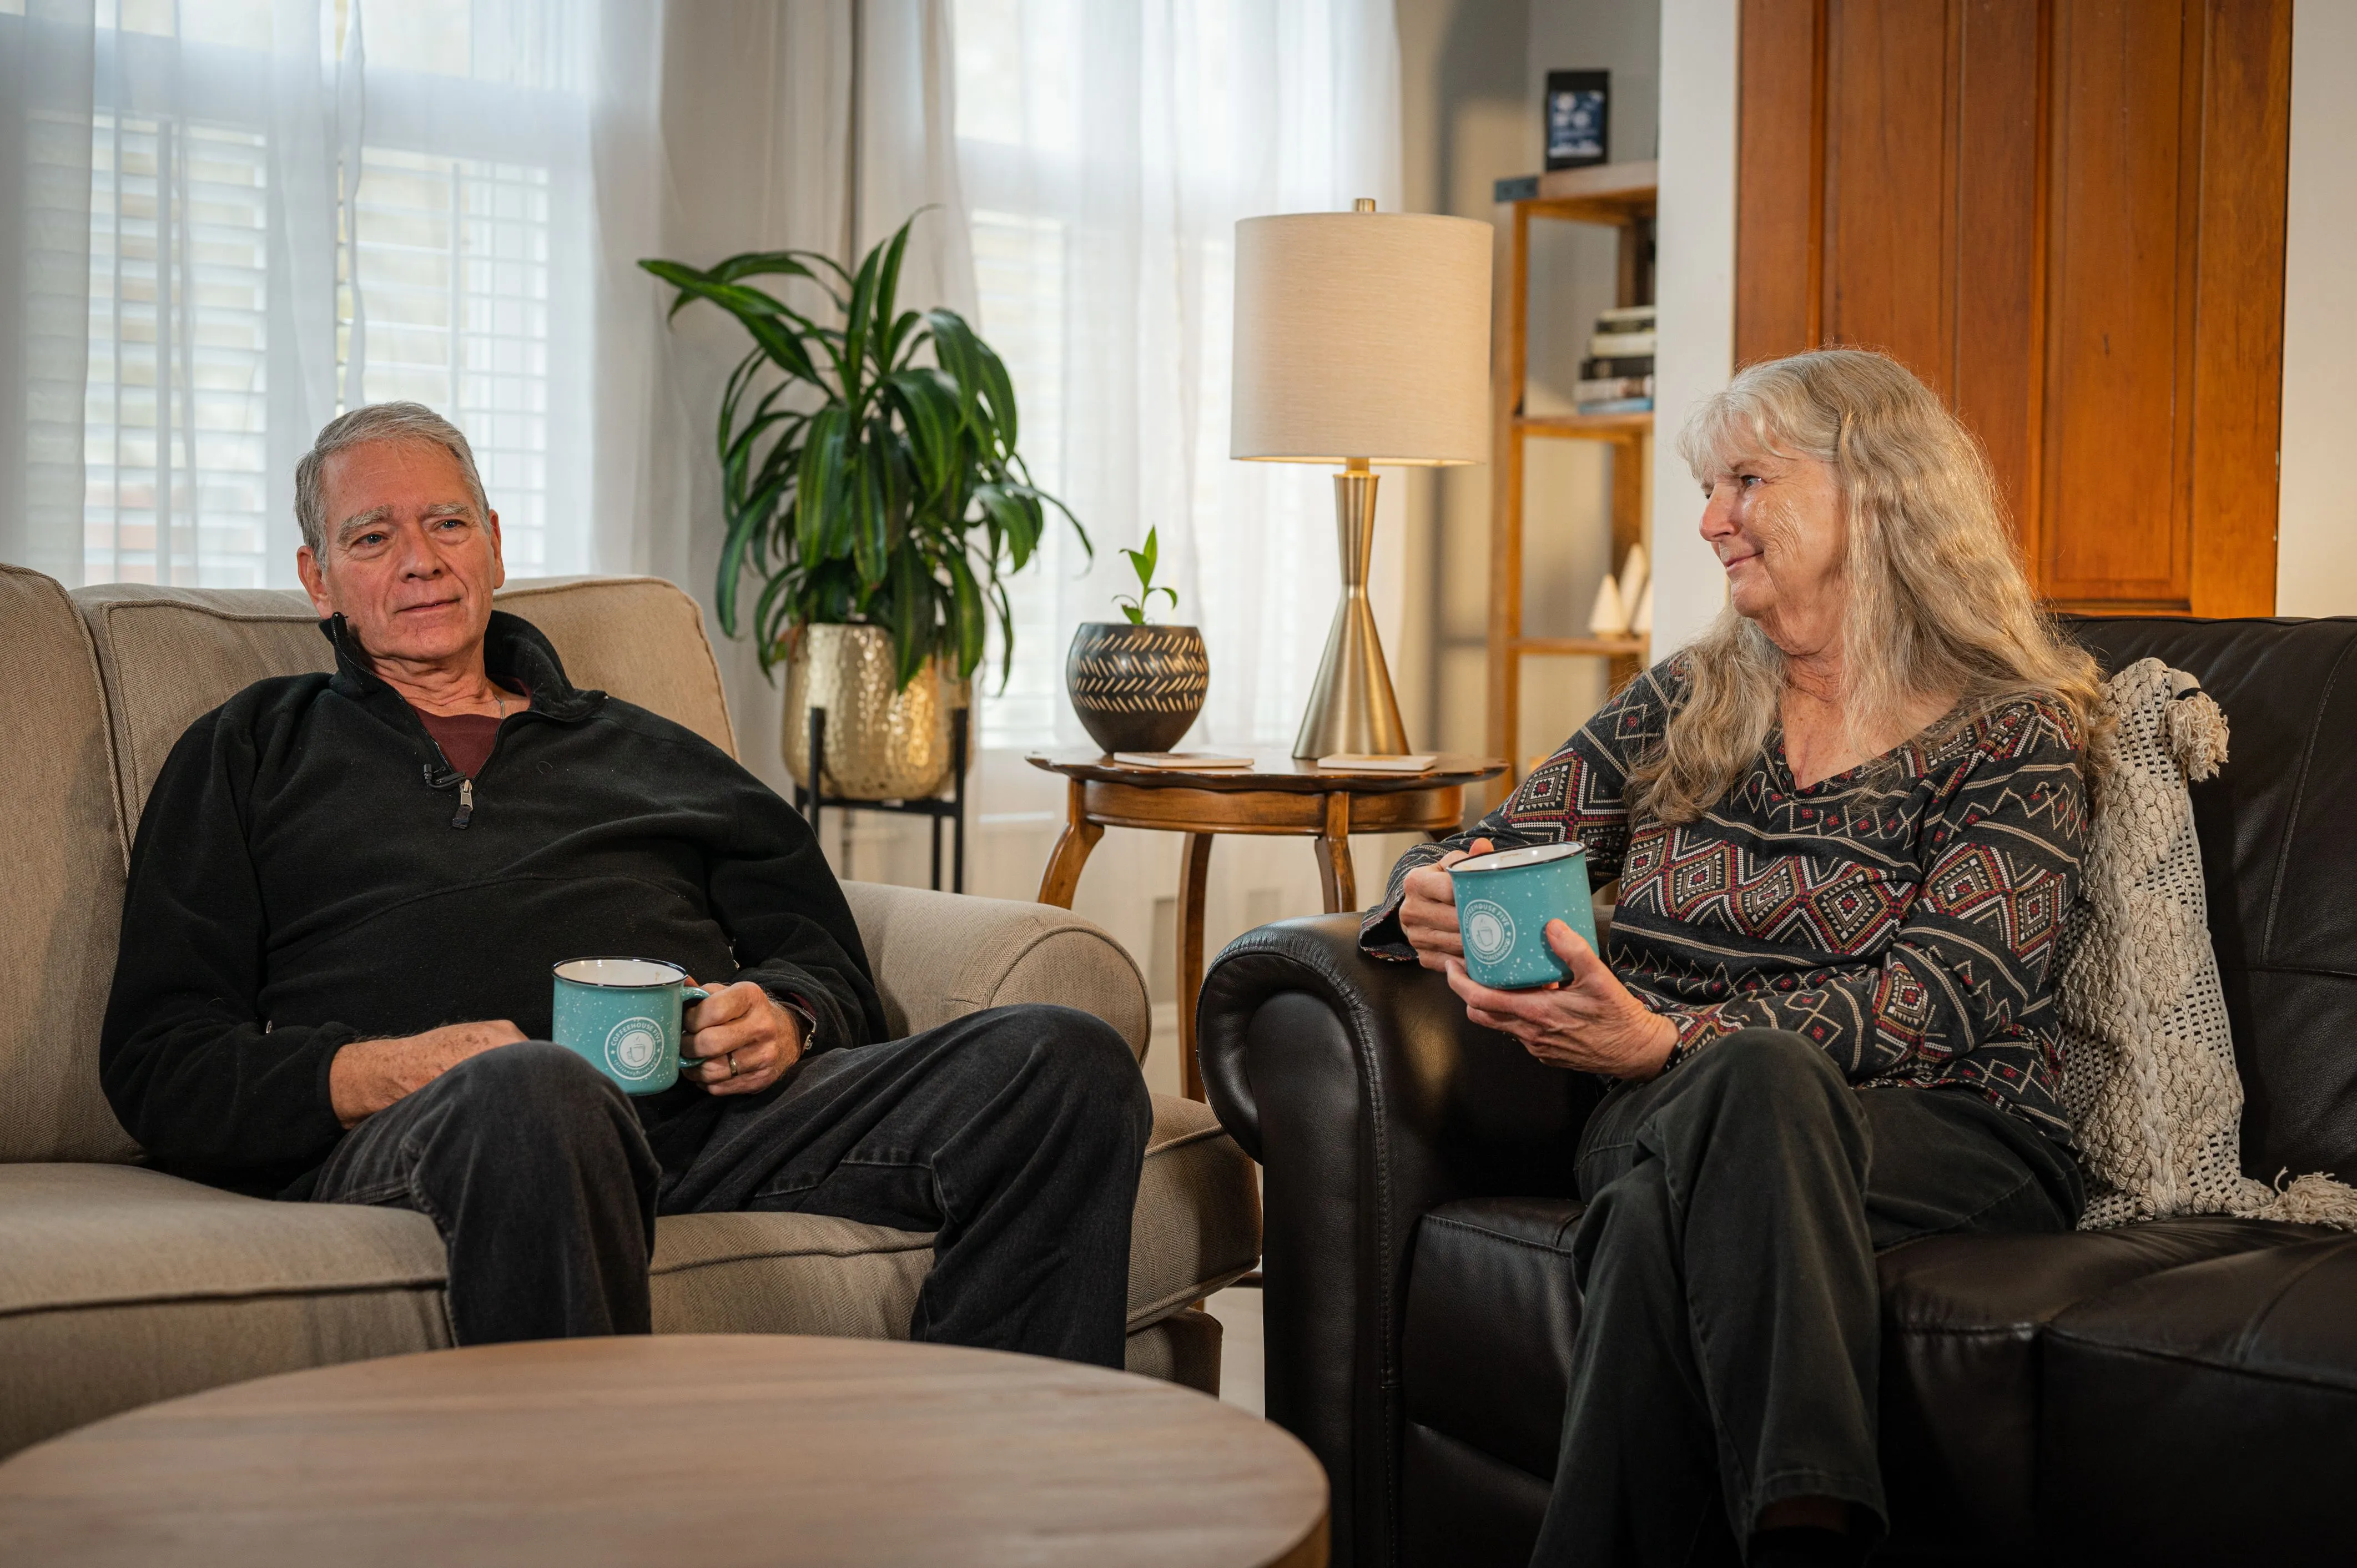 Two senior adults relax on a sofa while holding mugs in a cozy living room with a plant and lamp in the background.